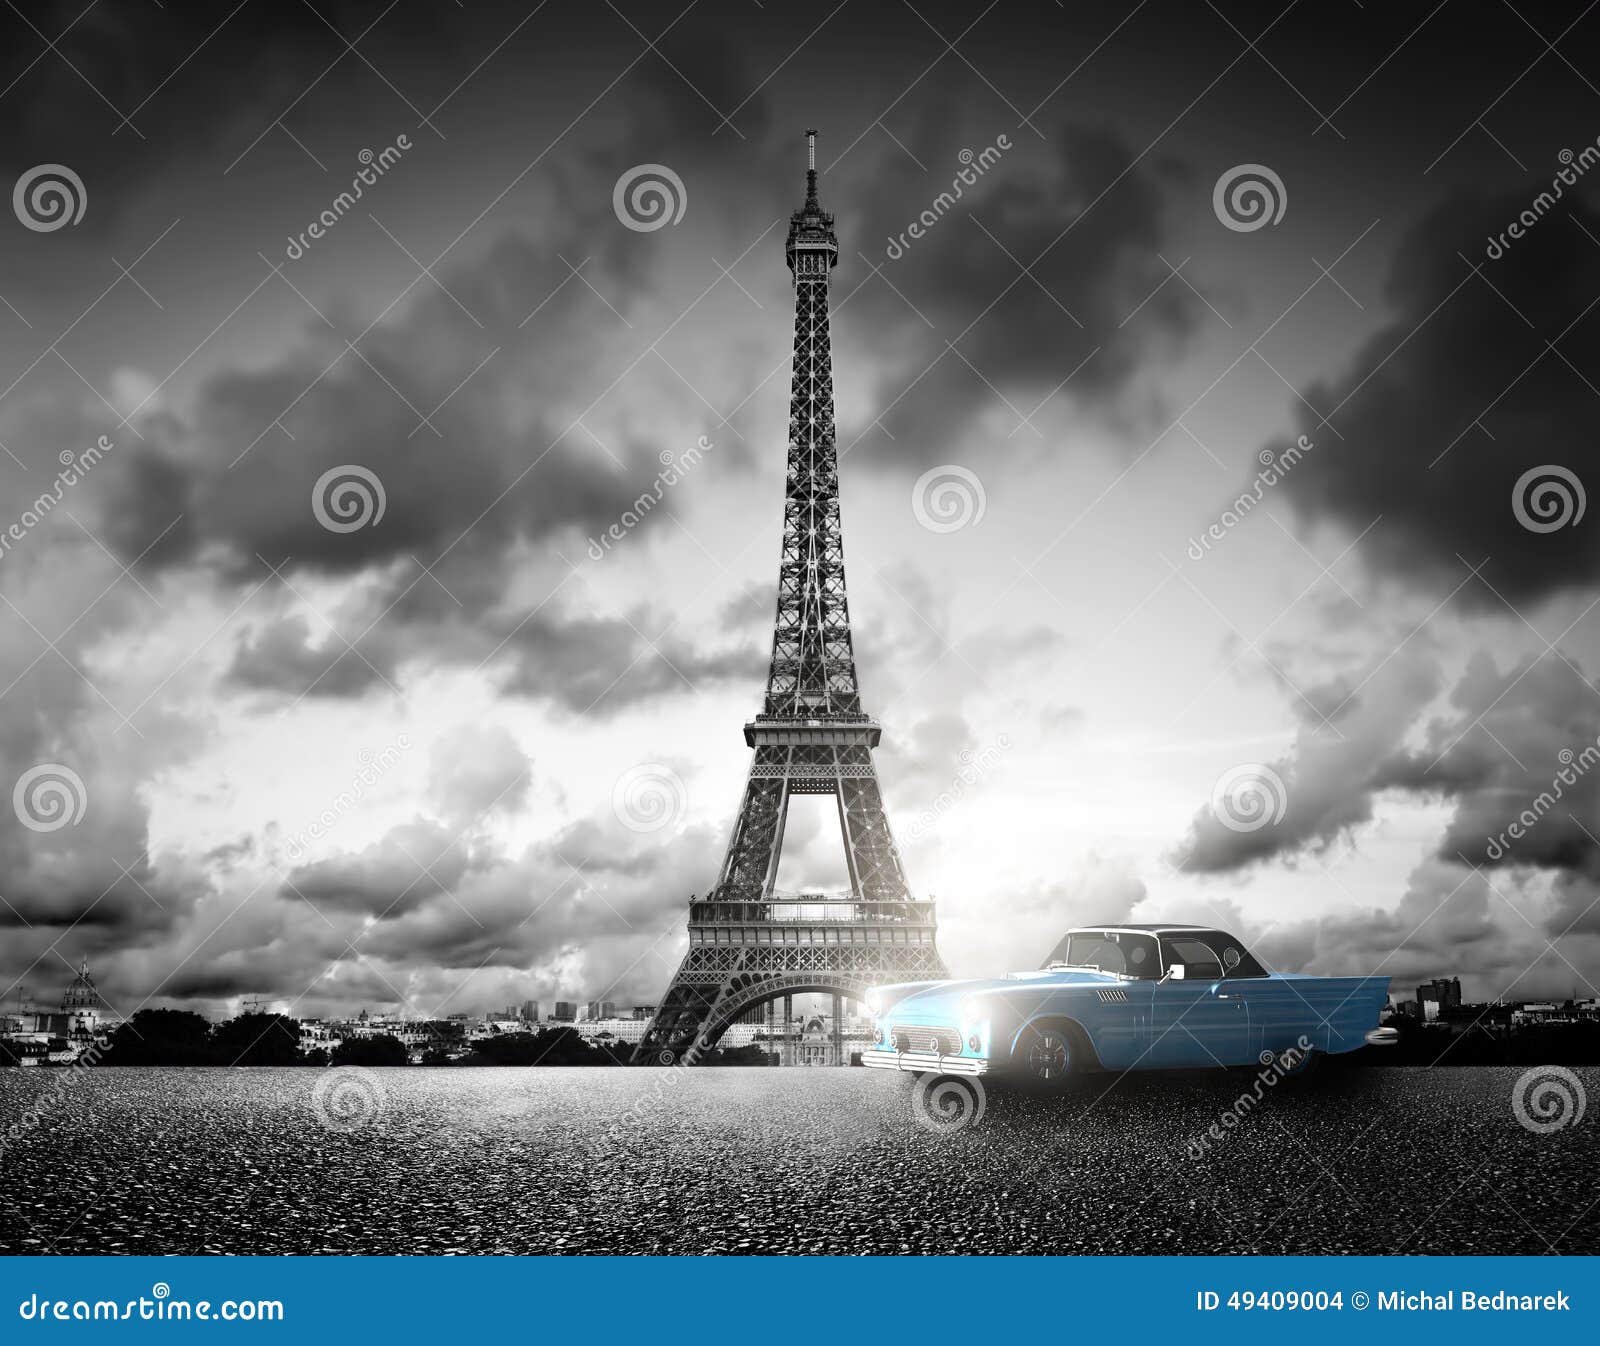 effel tower, paris, france and retro car. black and white